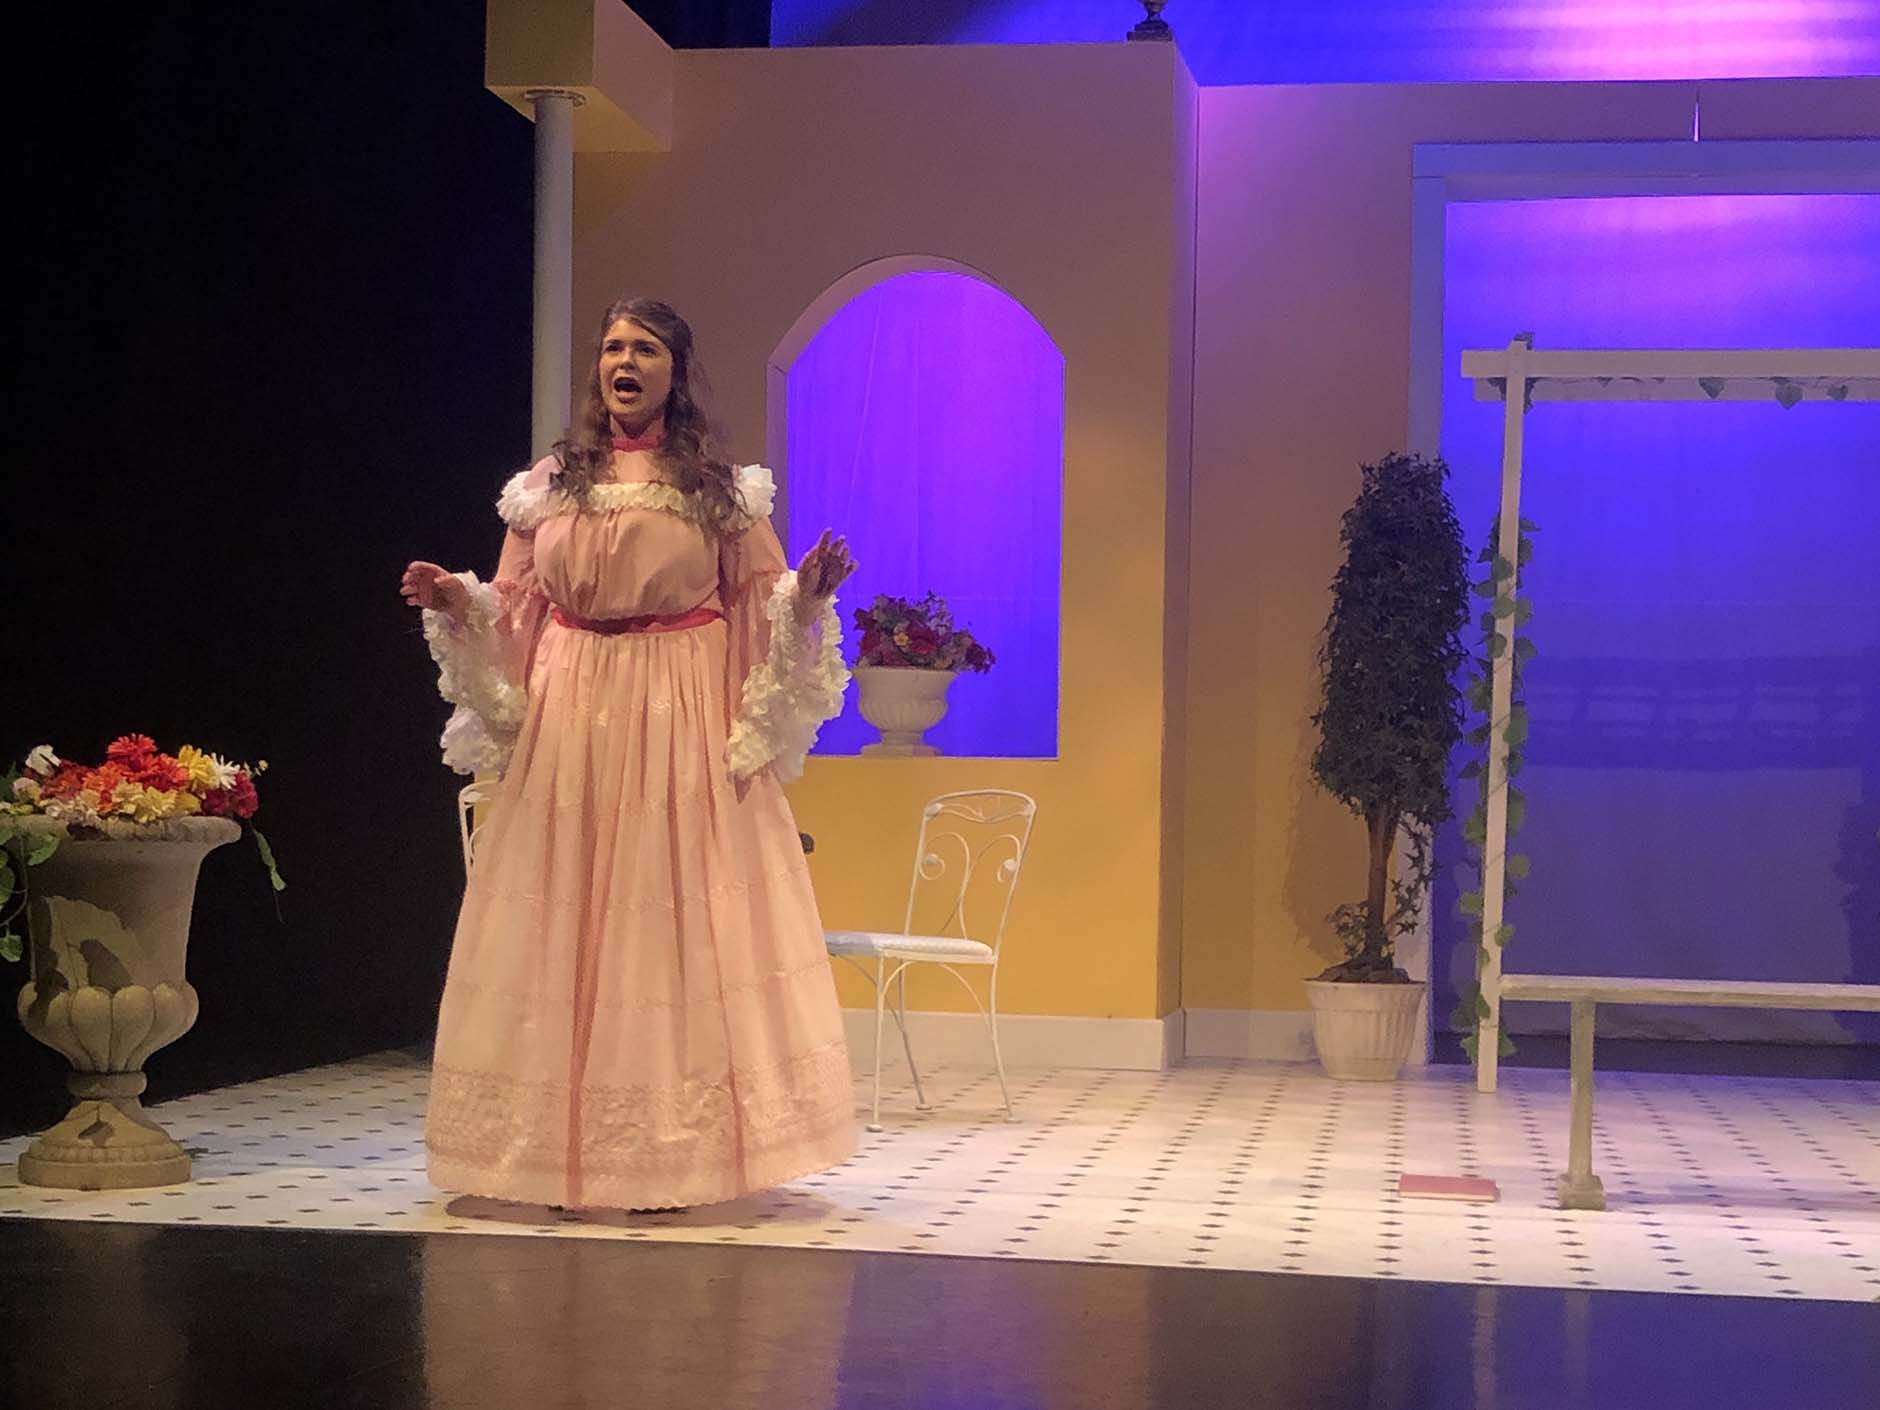 "The Importance of Being Earnest" at Endicott College